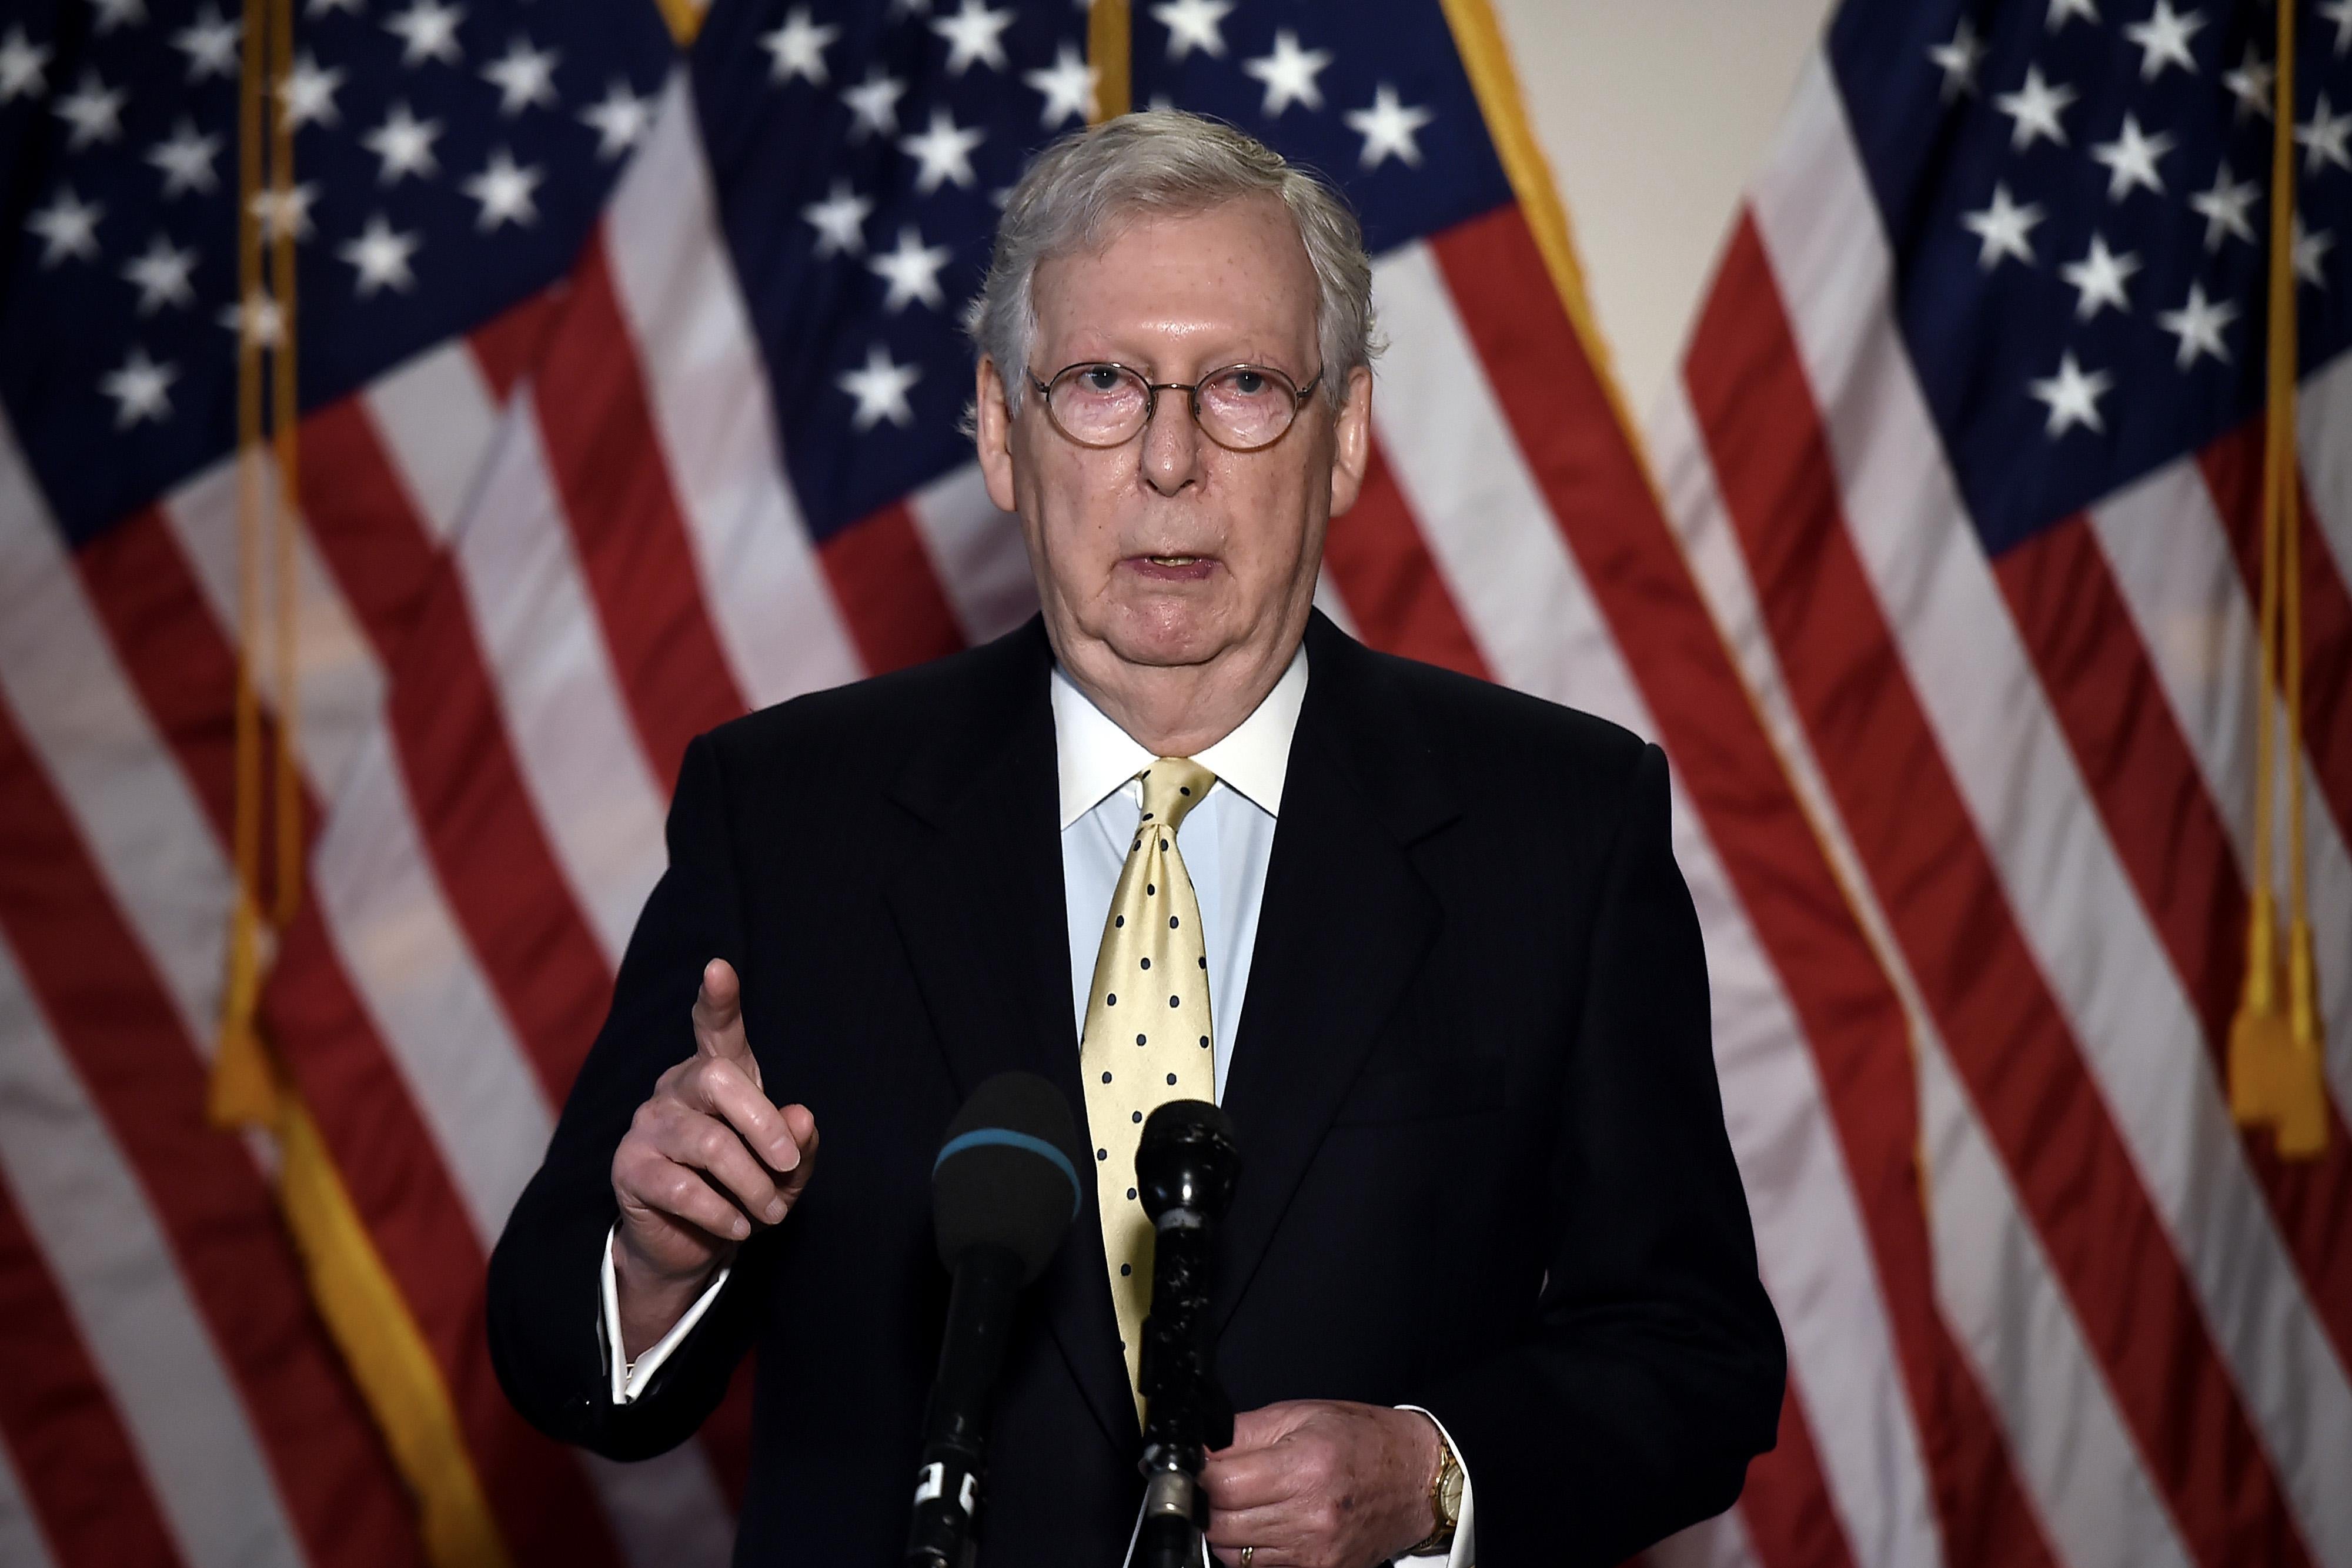 Mitch McConnell speaks into a microphone and points with American flags behind him.